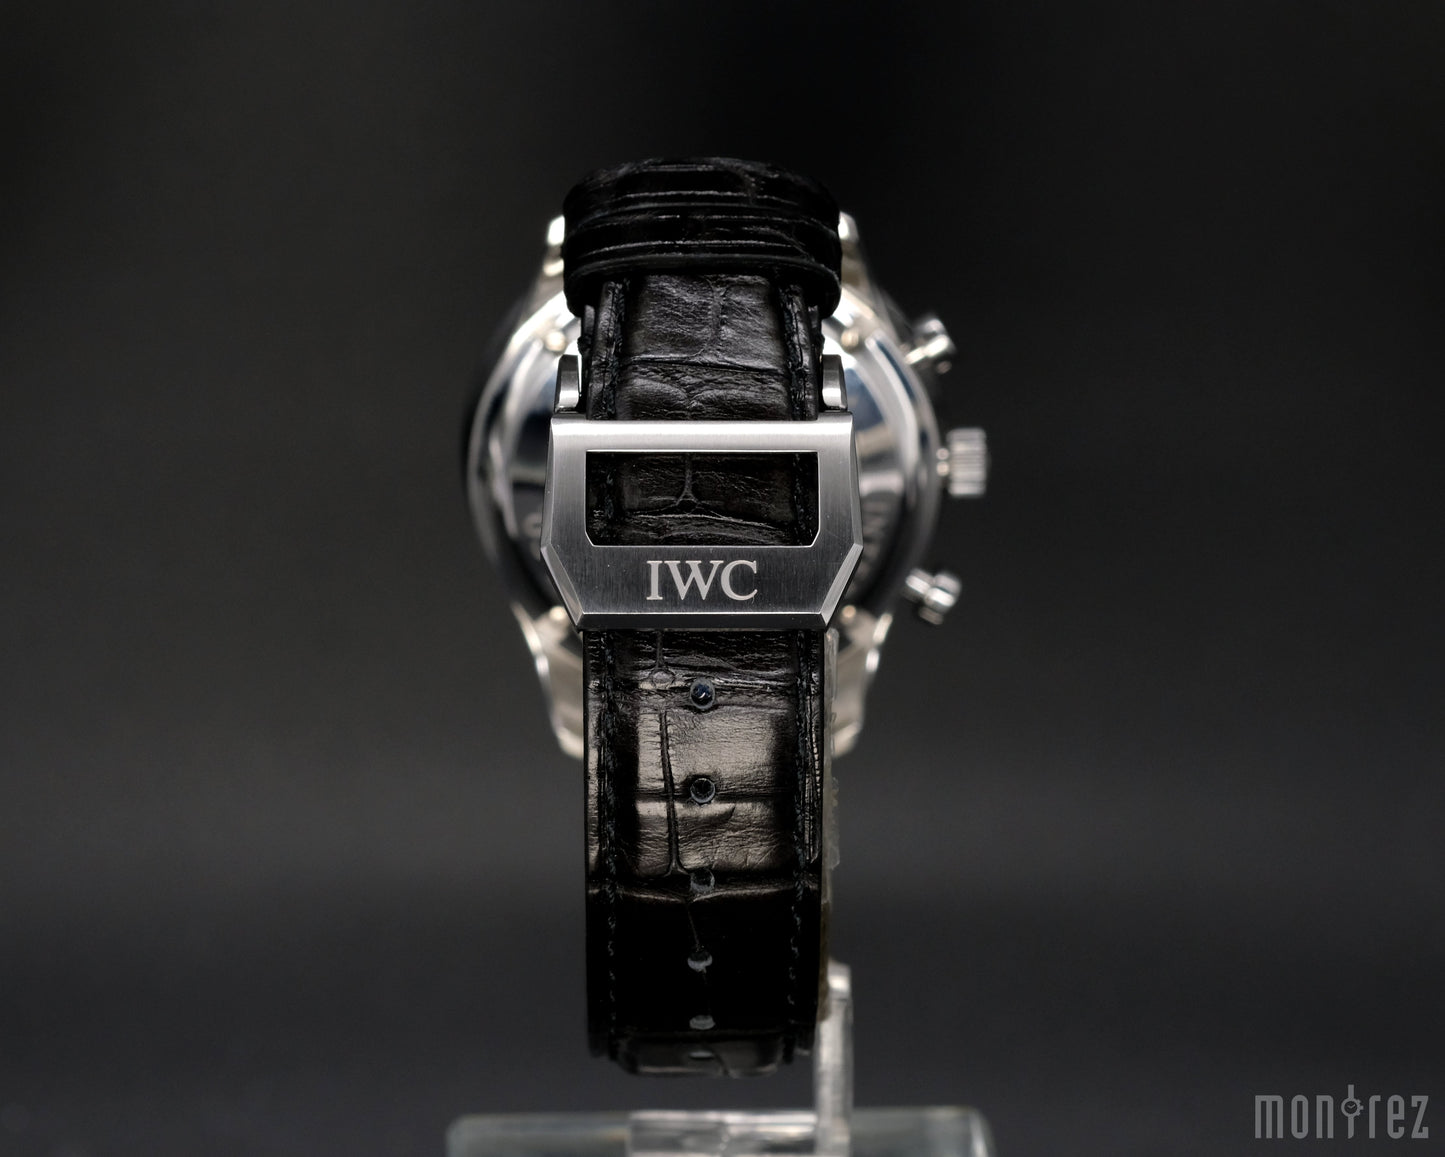 [Pre-Owned Watch] IWC Portuguese Chronograph 41mm IW371447